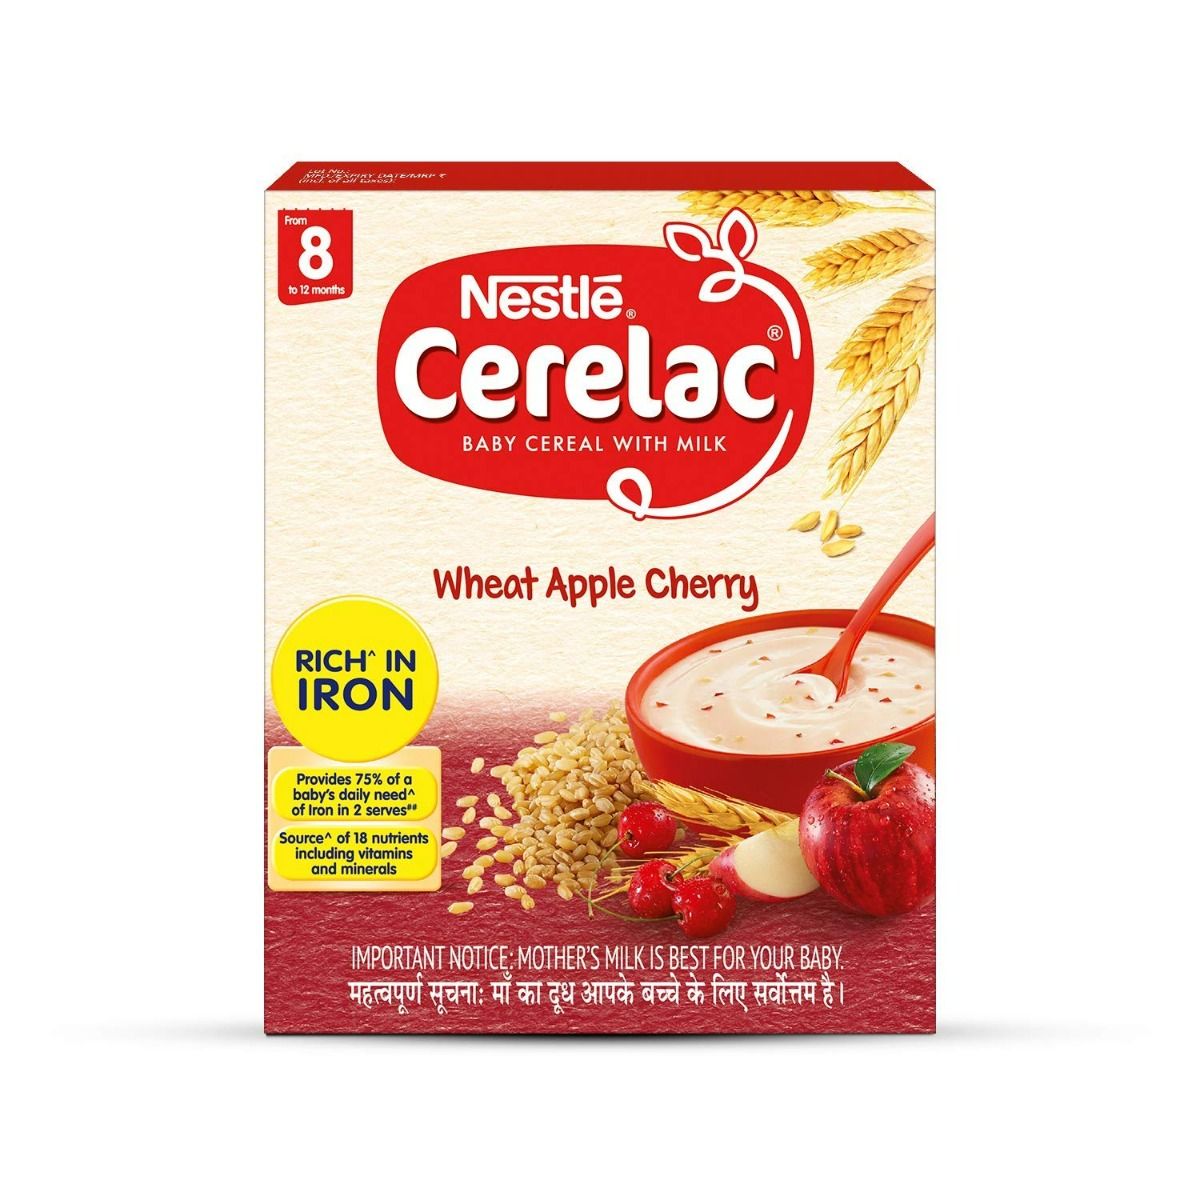 Buy Nestle Cerelac Wheat Apple Cherry Baby Cereal, 8 to 12 Months, 300 gm Refill Pack Online